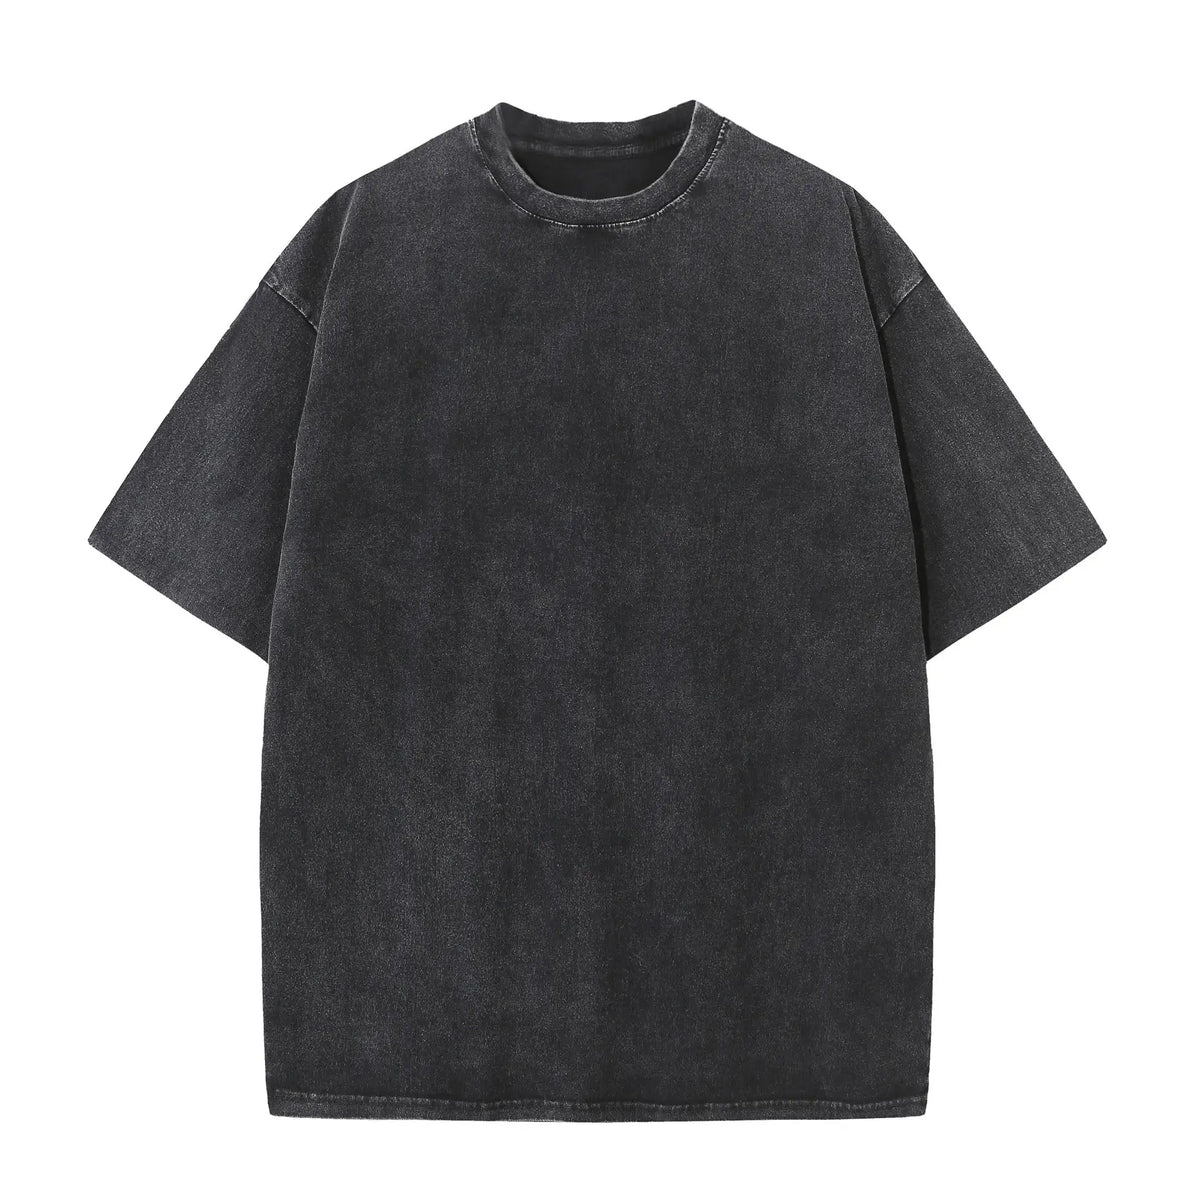 230GSM Heavy Loose Fit Washed T-Shirt